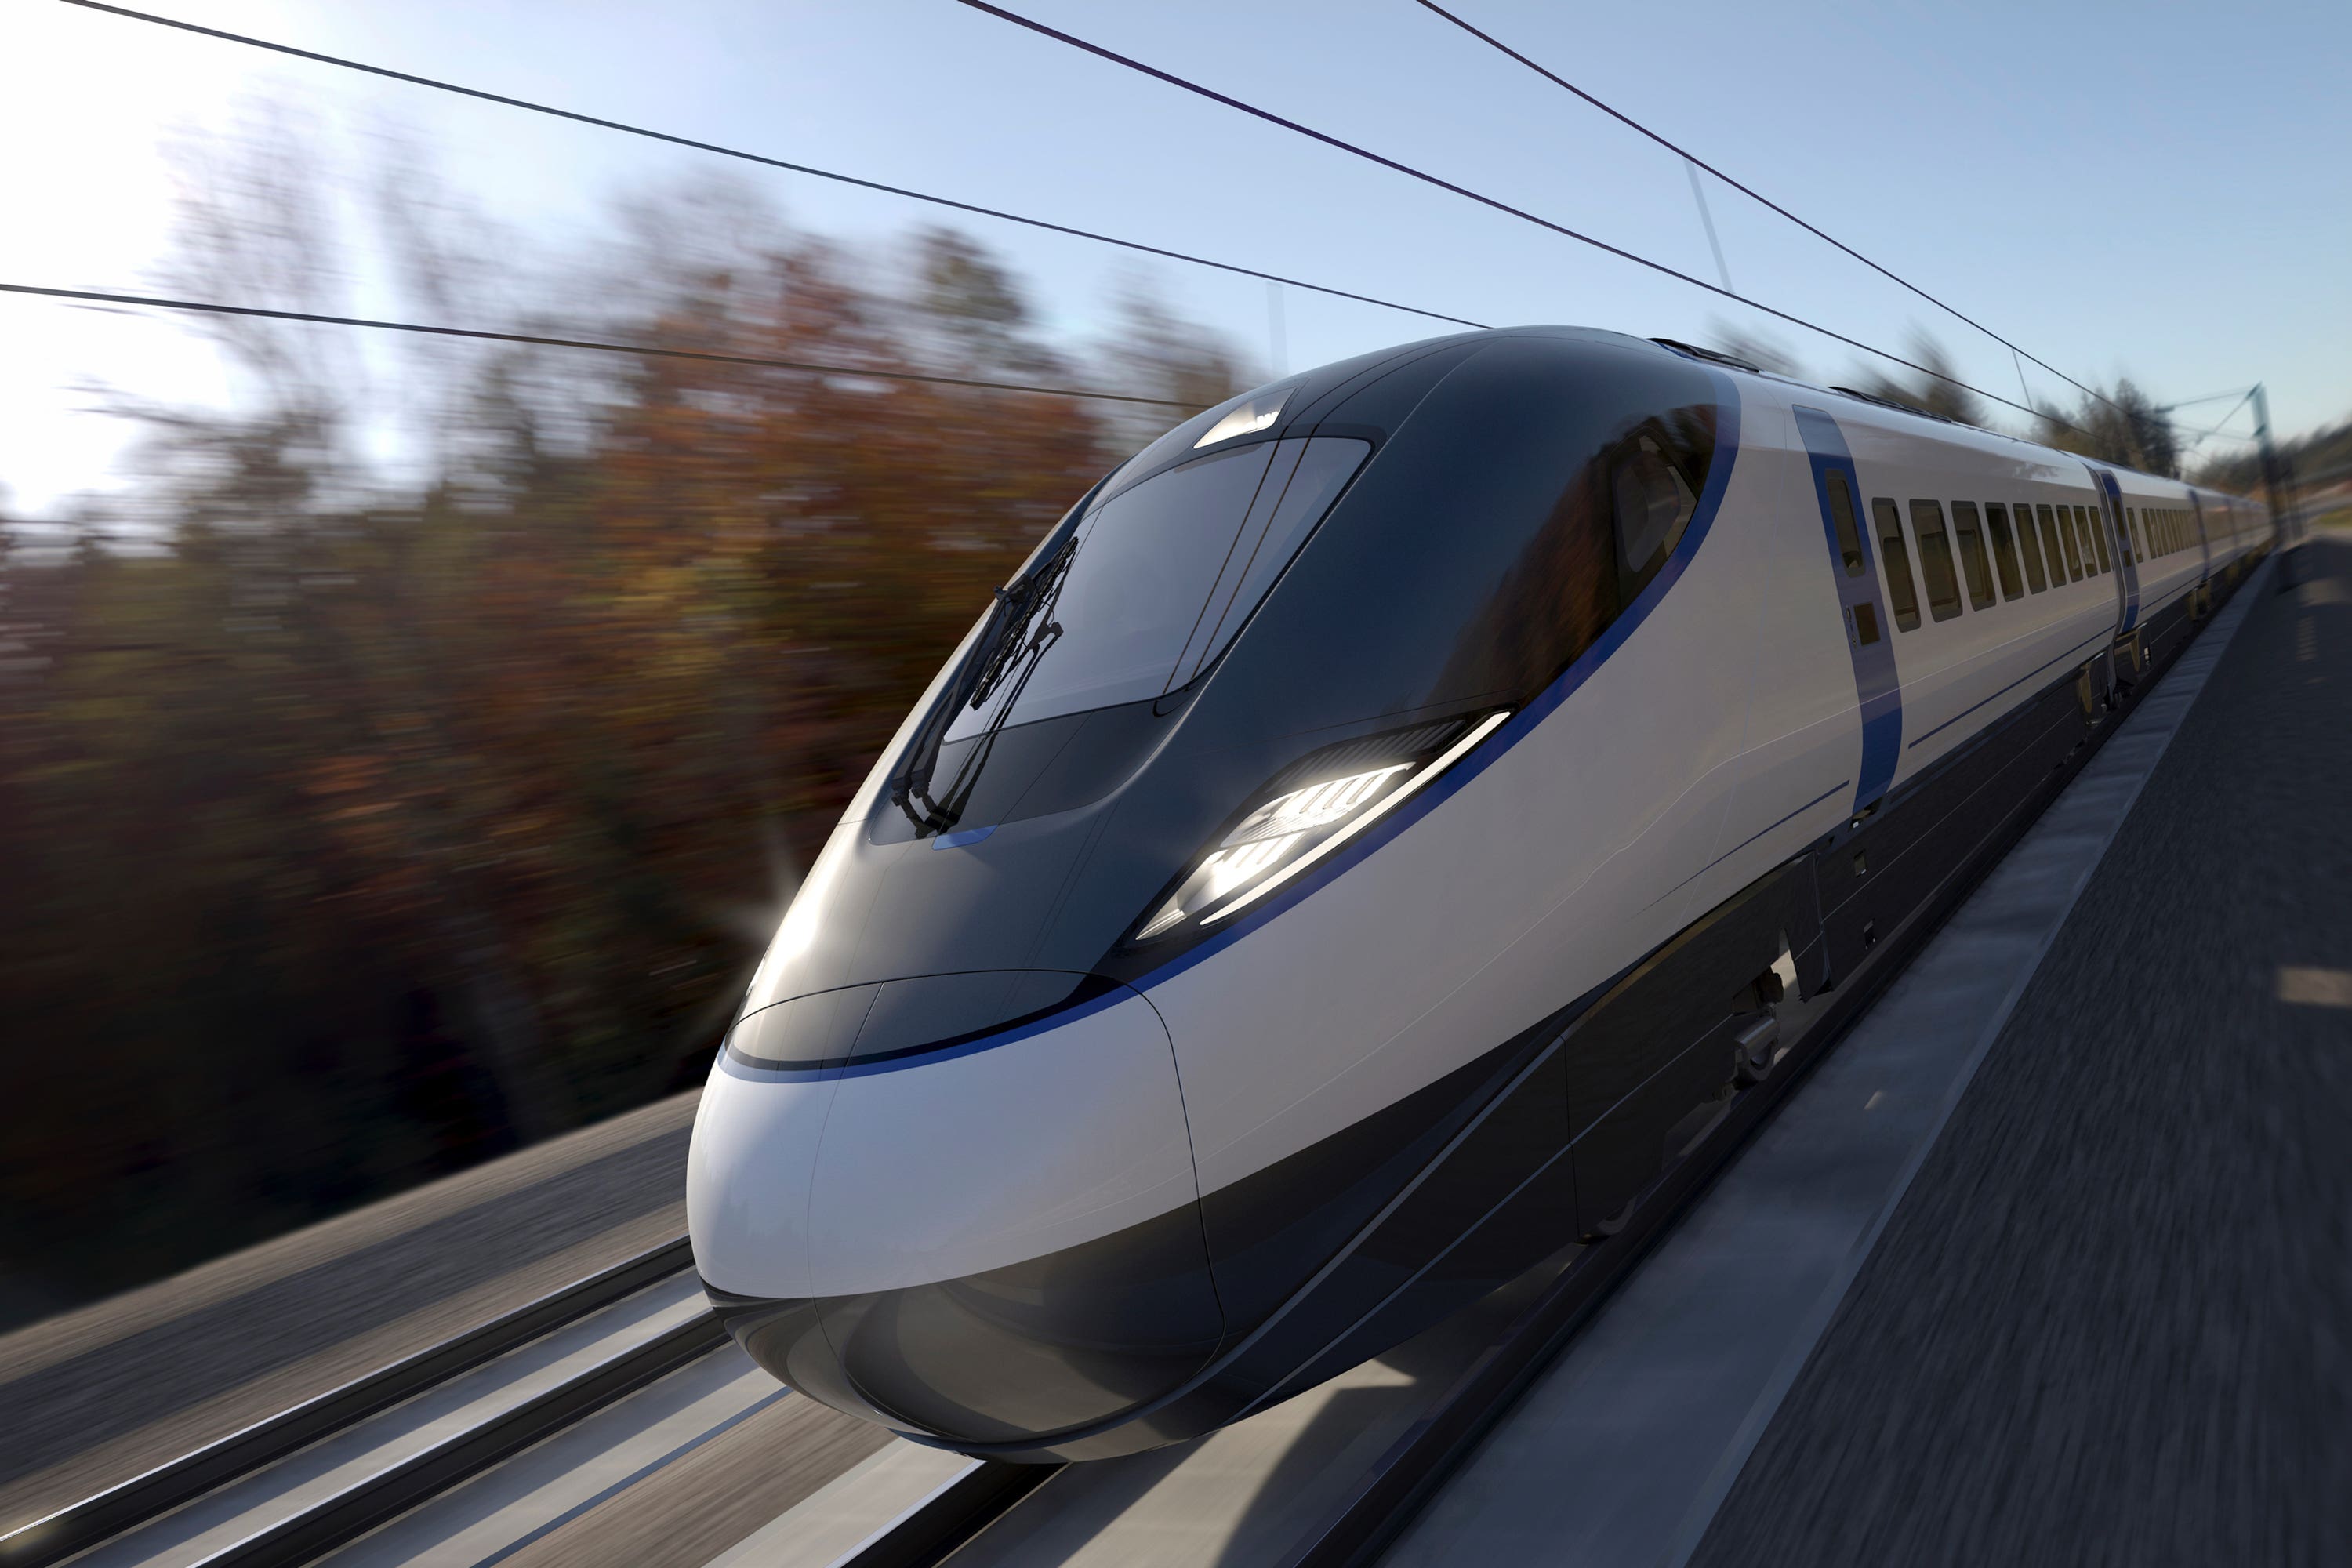 Amid delays, HS2 trains reportedly may not even run into central London